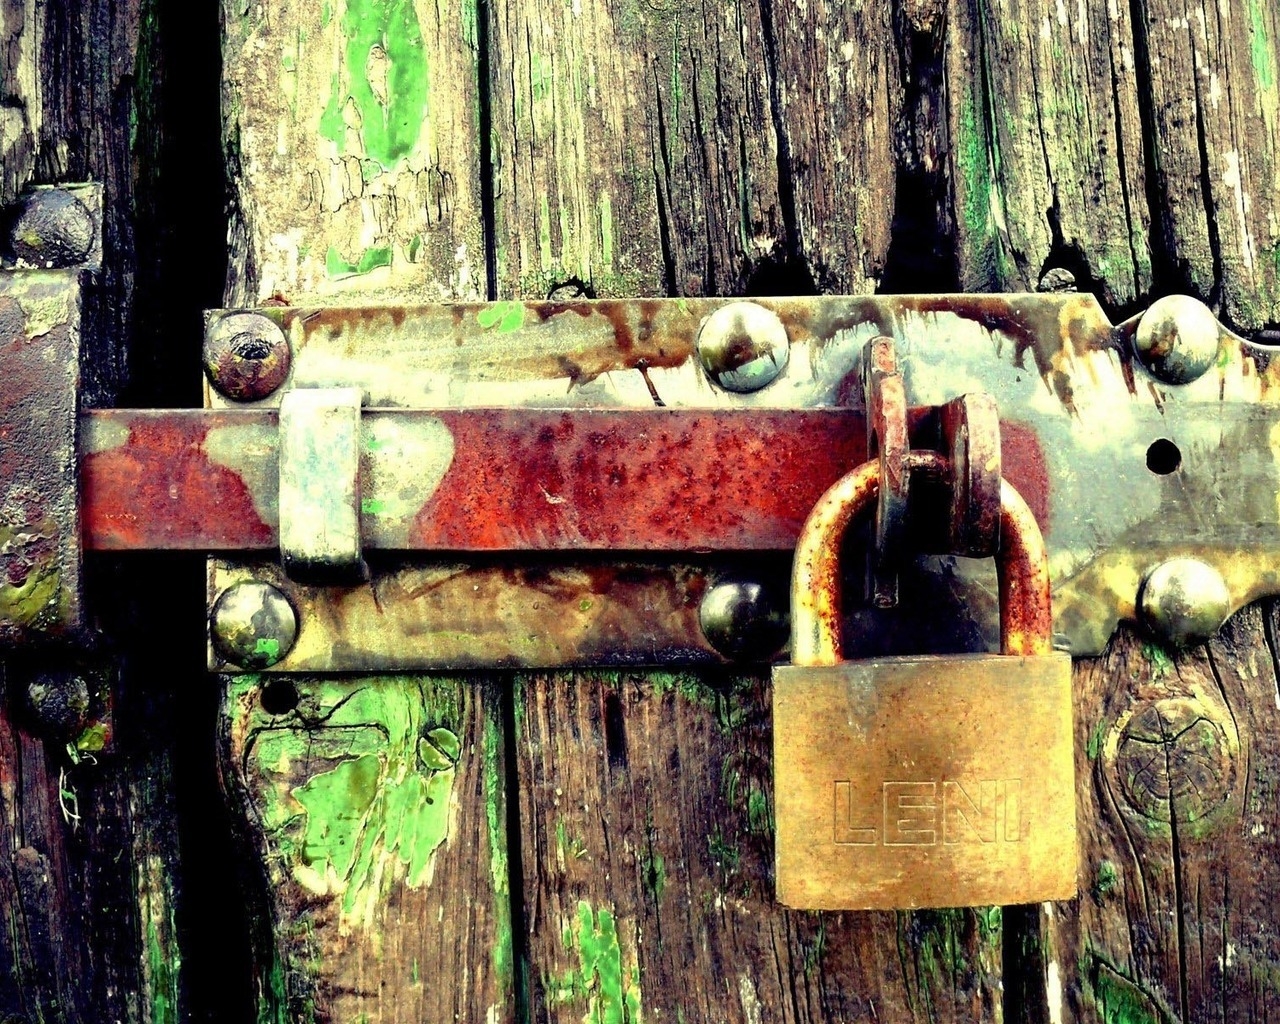 Padlock on the gate for 1280 x 1024 resolution